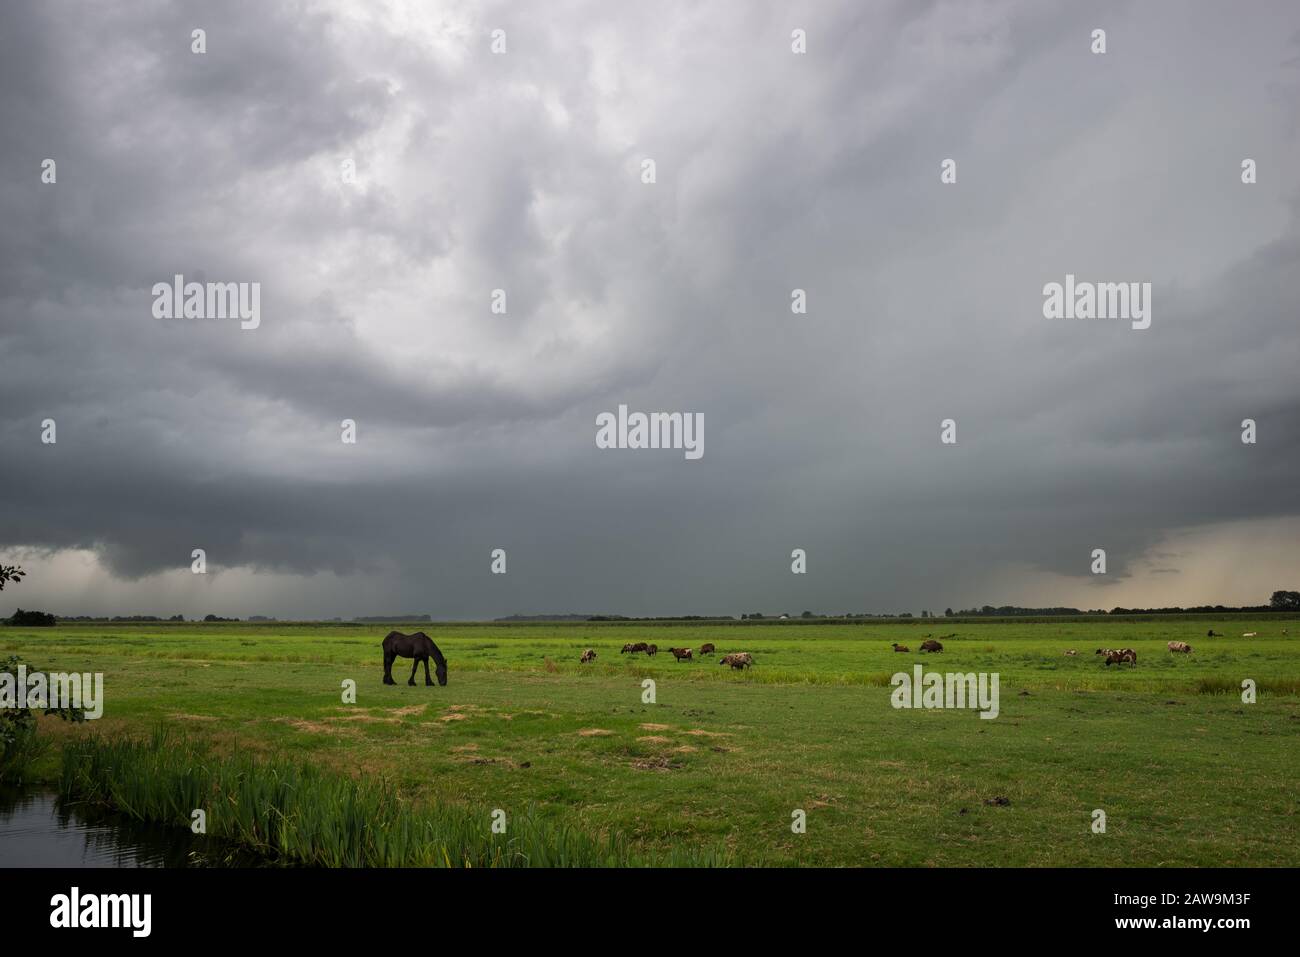 Beautiful landscape image of polder Alblasserwaard, Netherlands at the approach  of a strong thunderstorm with grazing horse in the foreground. Stock Photo